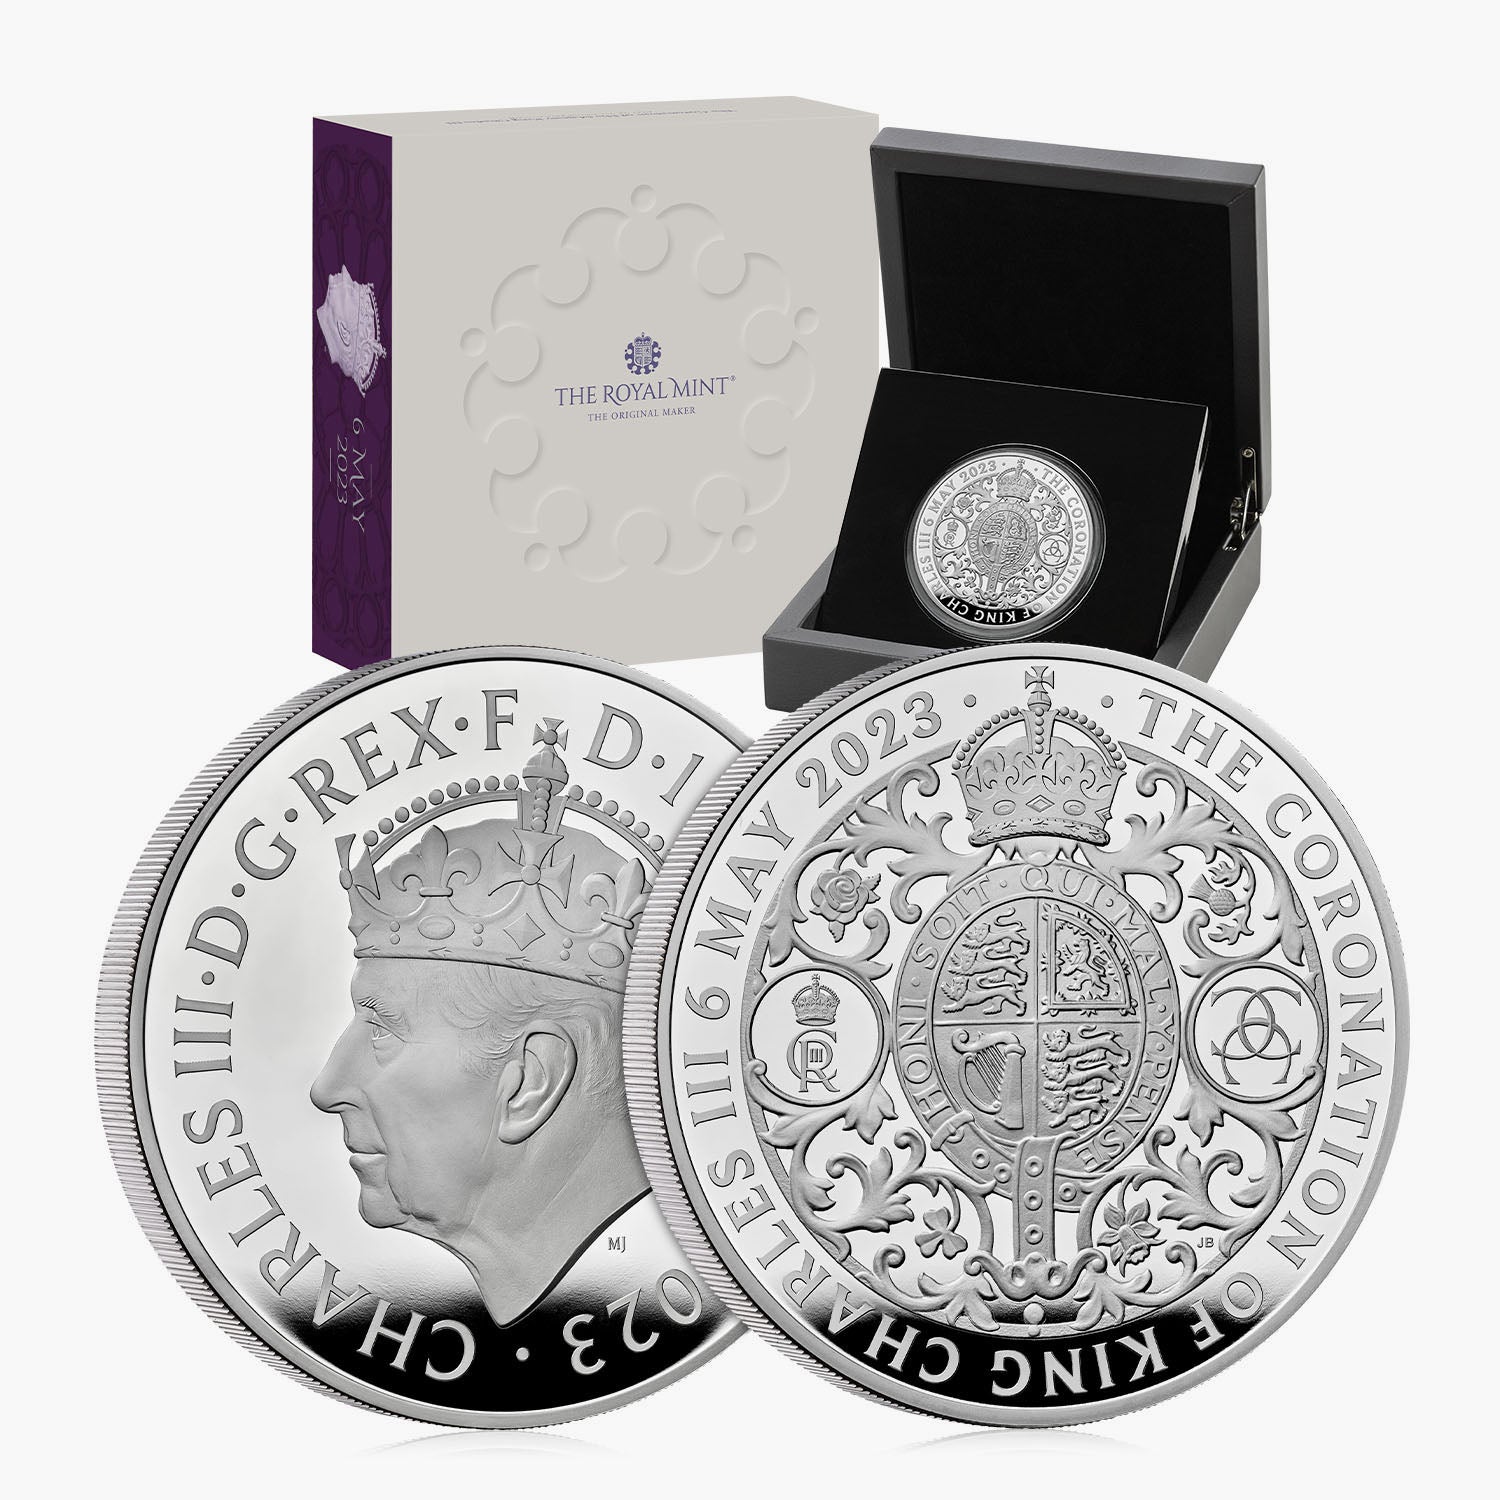 The Coronation of His Majesty King Charles 5 Oz Silver Proof